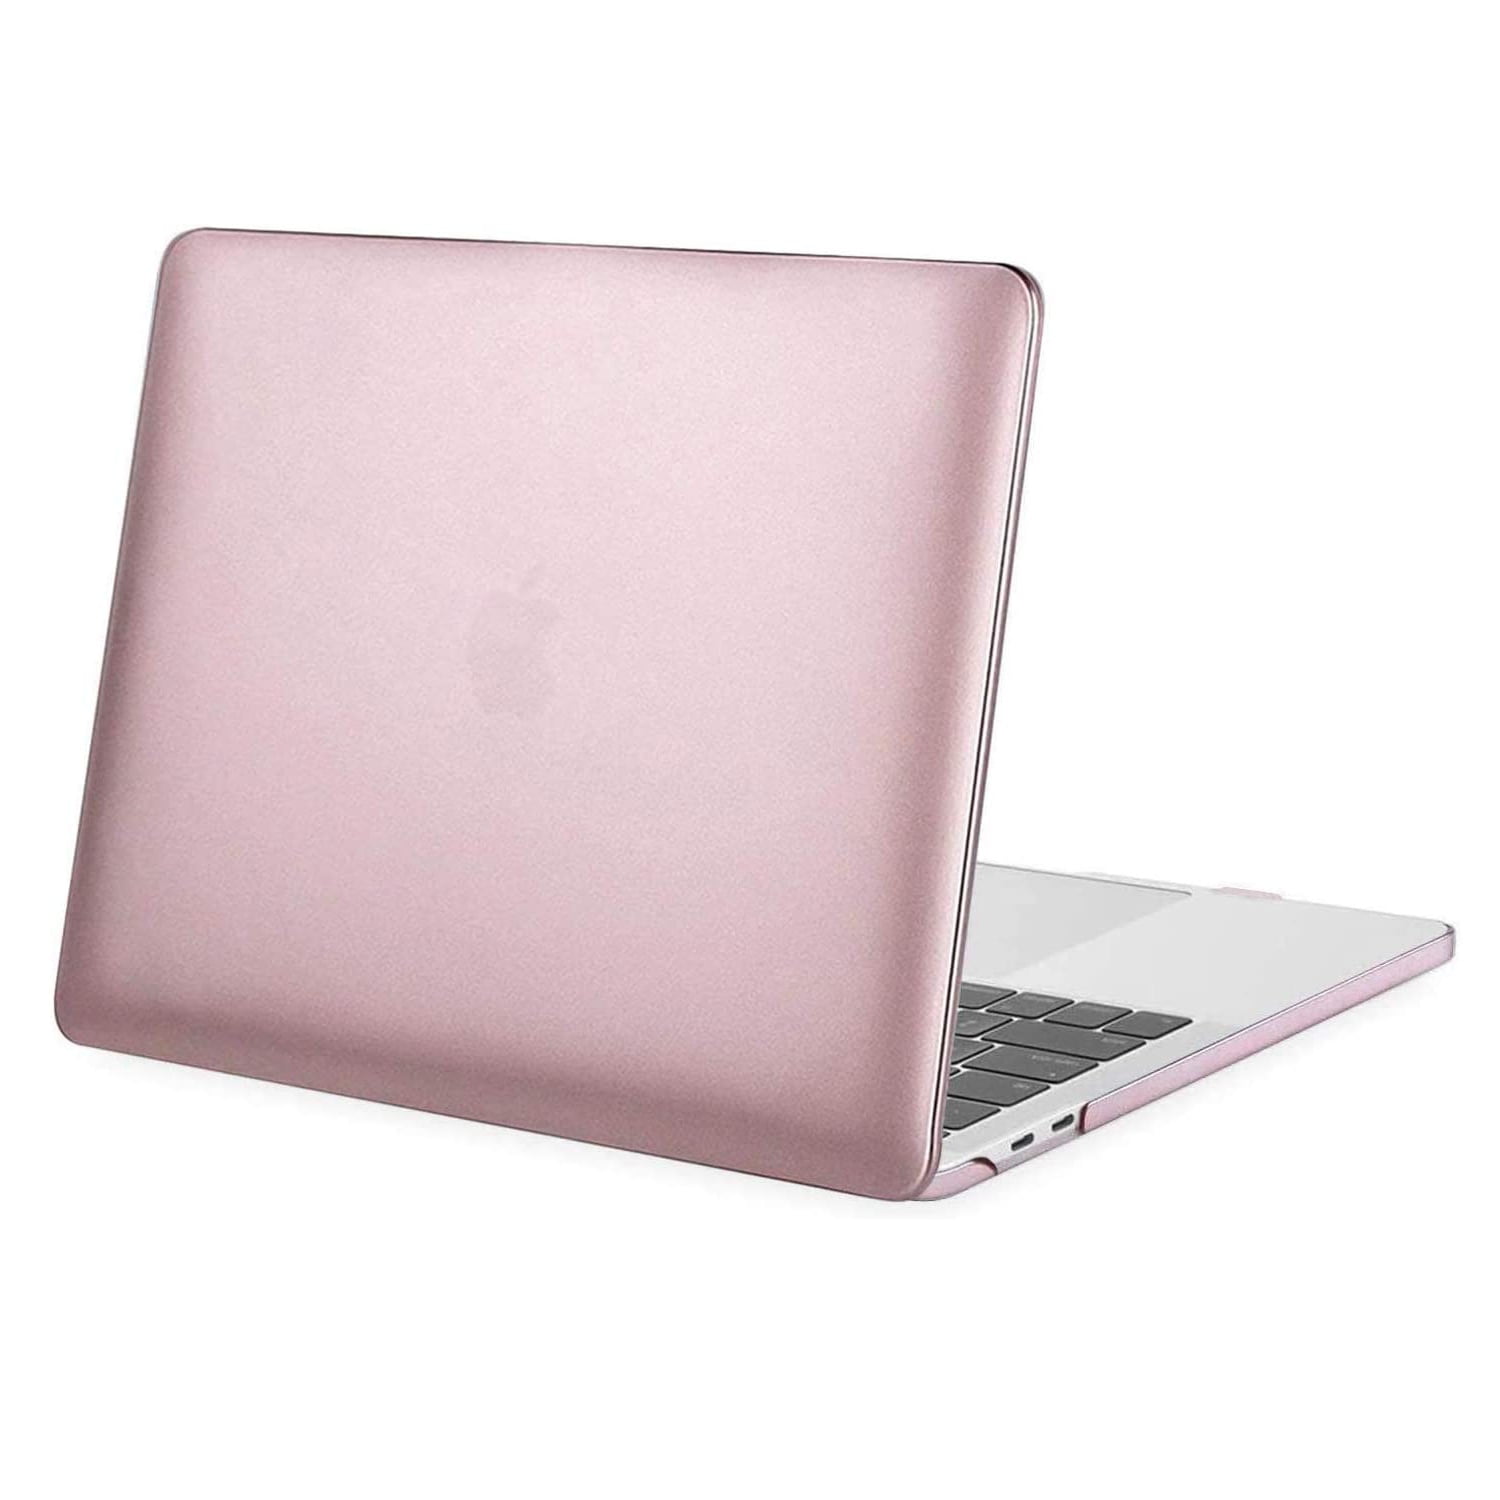 MOSISO MacBook Pro 13 inch Case 2019 2018 2017 2016 Release A2159 A1989 A1706 A1708 Plastic Hard Shell Case&Keyboard Cover&Screen Protector&Storage Bag Compatible with MacBook Pro 13 Rose Gold 